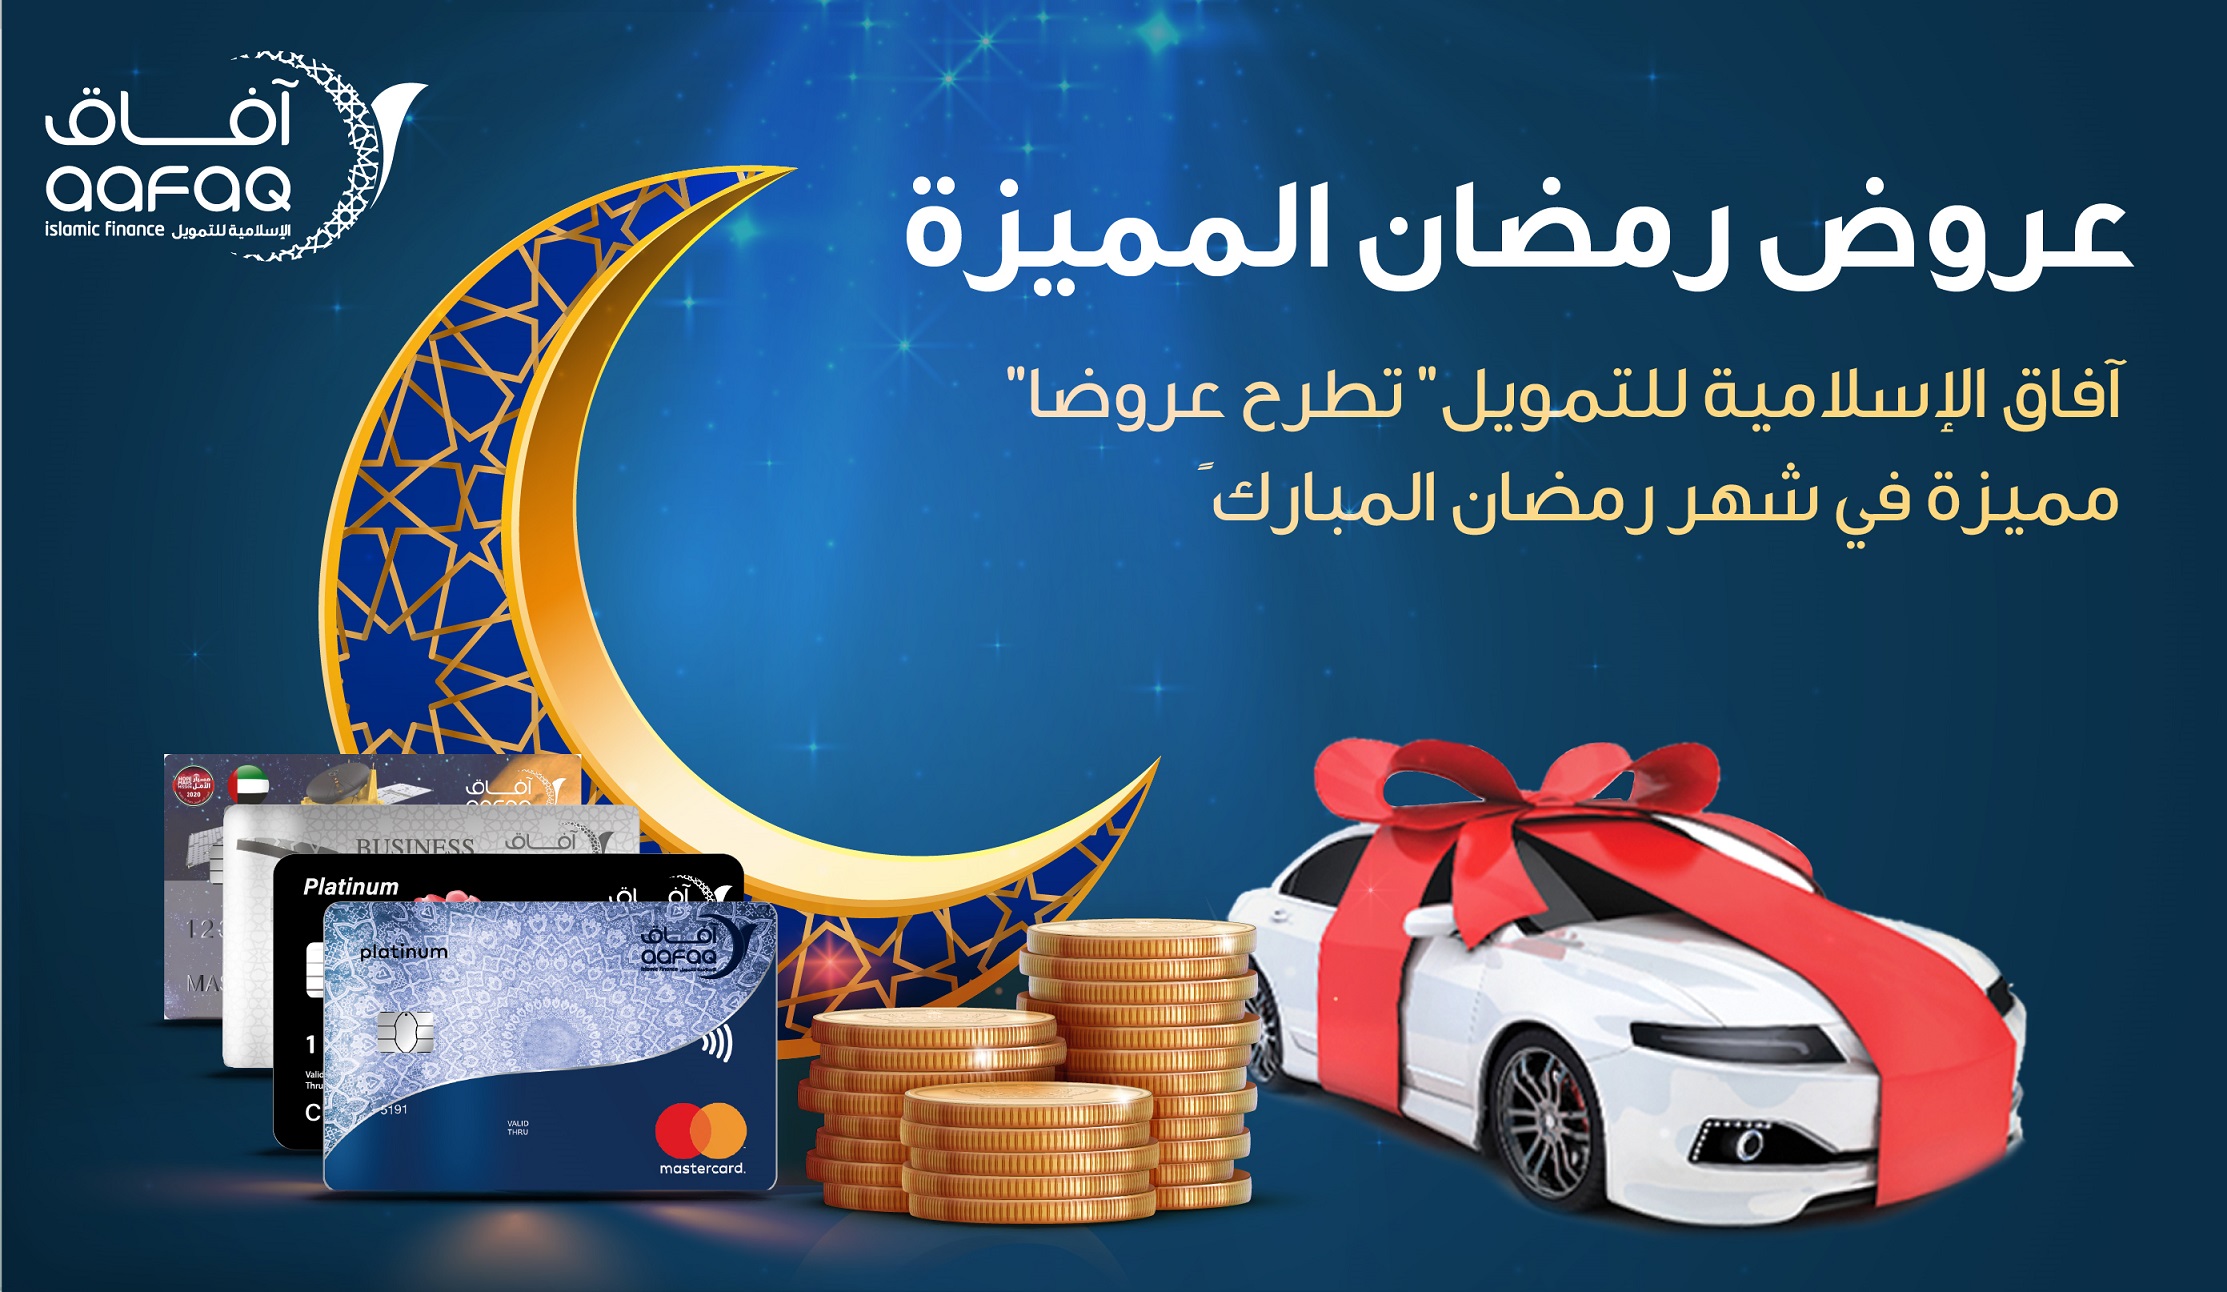 Enjoy special offers during the holy month of Ramadan from Aafaq Islamic Finance with flexible payment plans